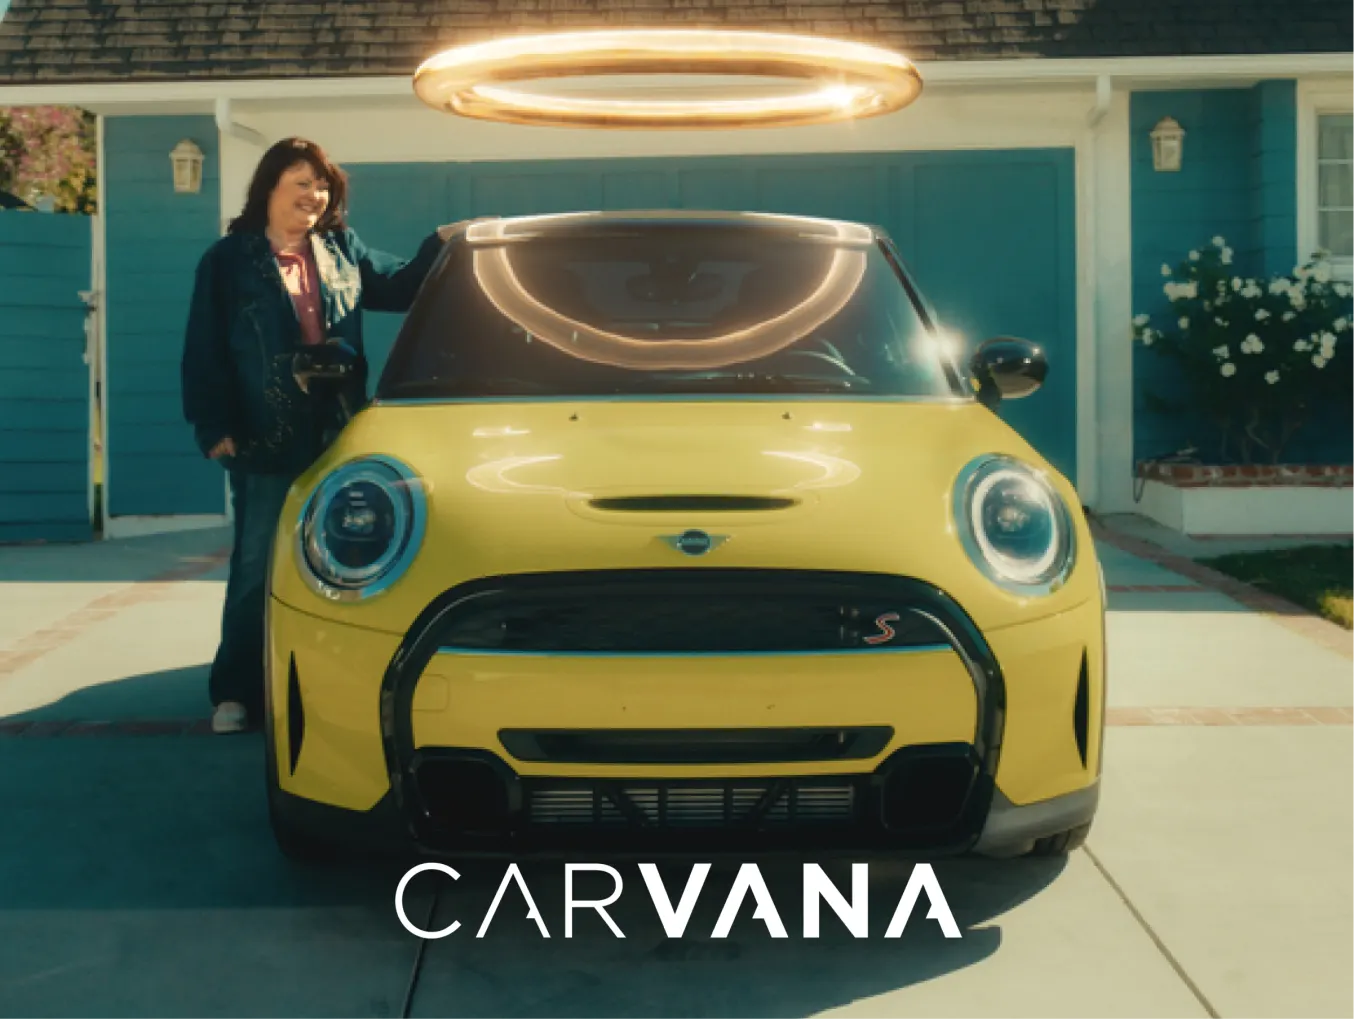 Carvana advertisement featuring a woman standing next to a yellow Mini Cooper parked in front of a blue house. A glowing halo is above the car. The Carvana logo is displayed at the bottom of the image.
